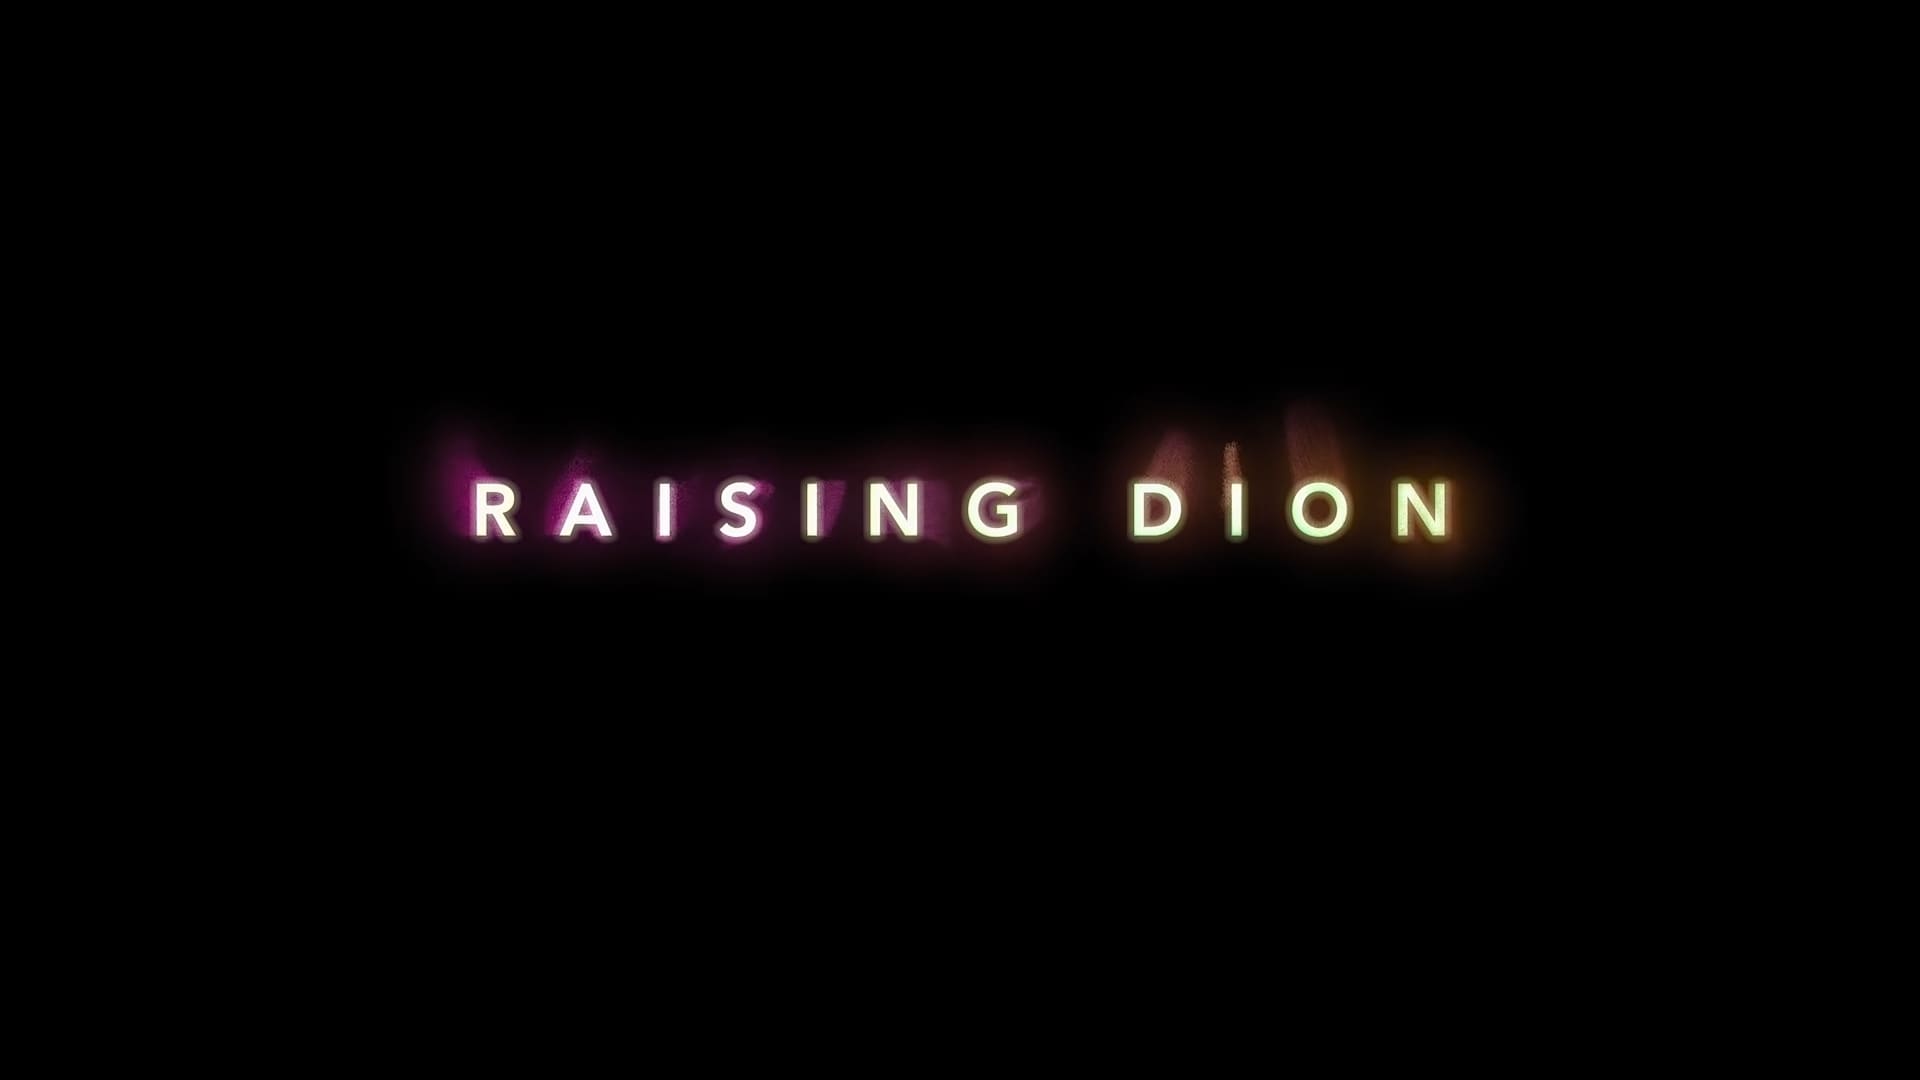 Raising Dion Season 2 Trailer, Coming to Netflix in February 2022